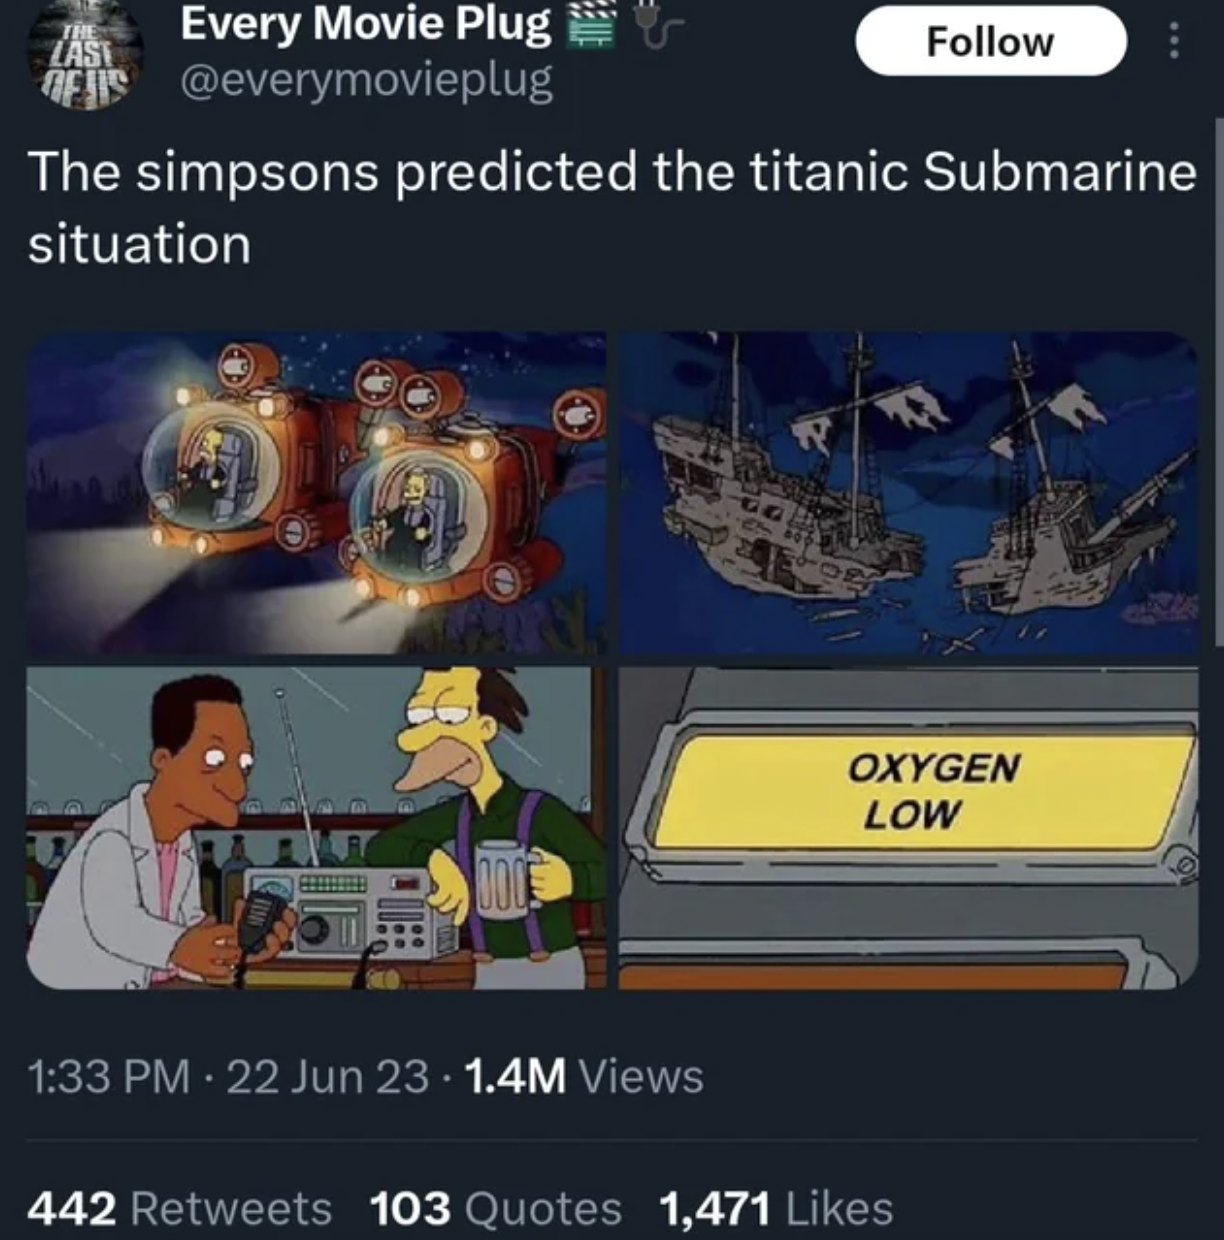 cartoon - Last Every Movie Plug Past The simpsons predicted the titanic Submarine situation 22 Jun 23 1.4M Views Oxygen Low 442 103 Quotes 1,471 1